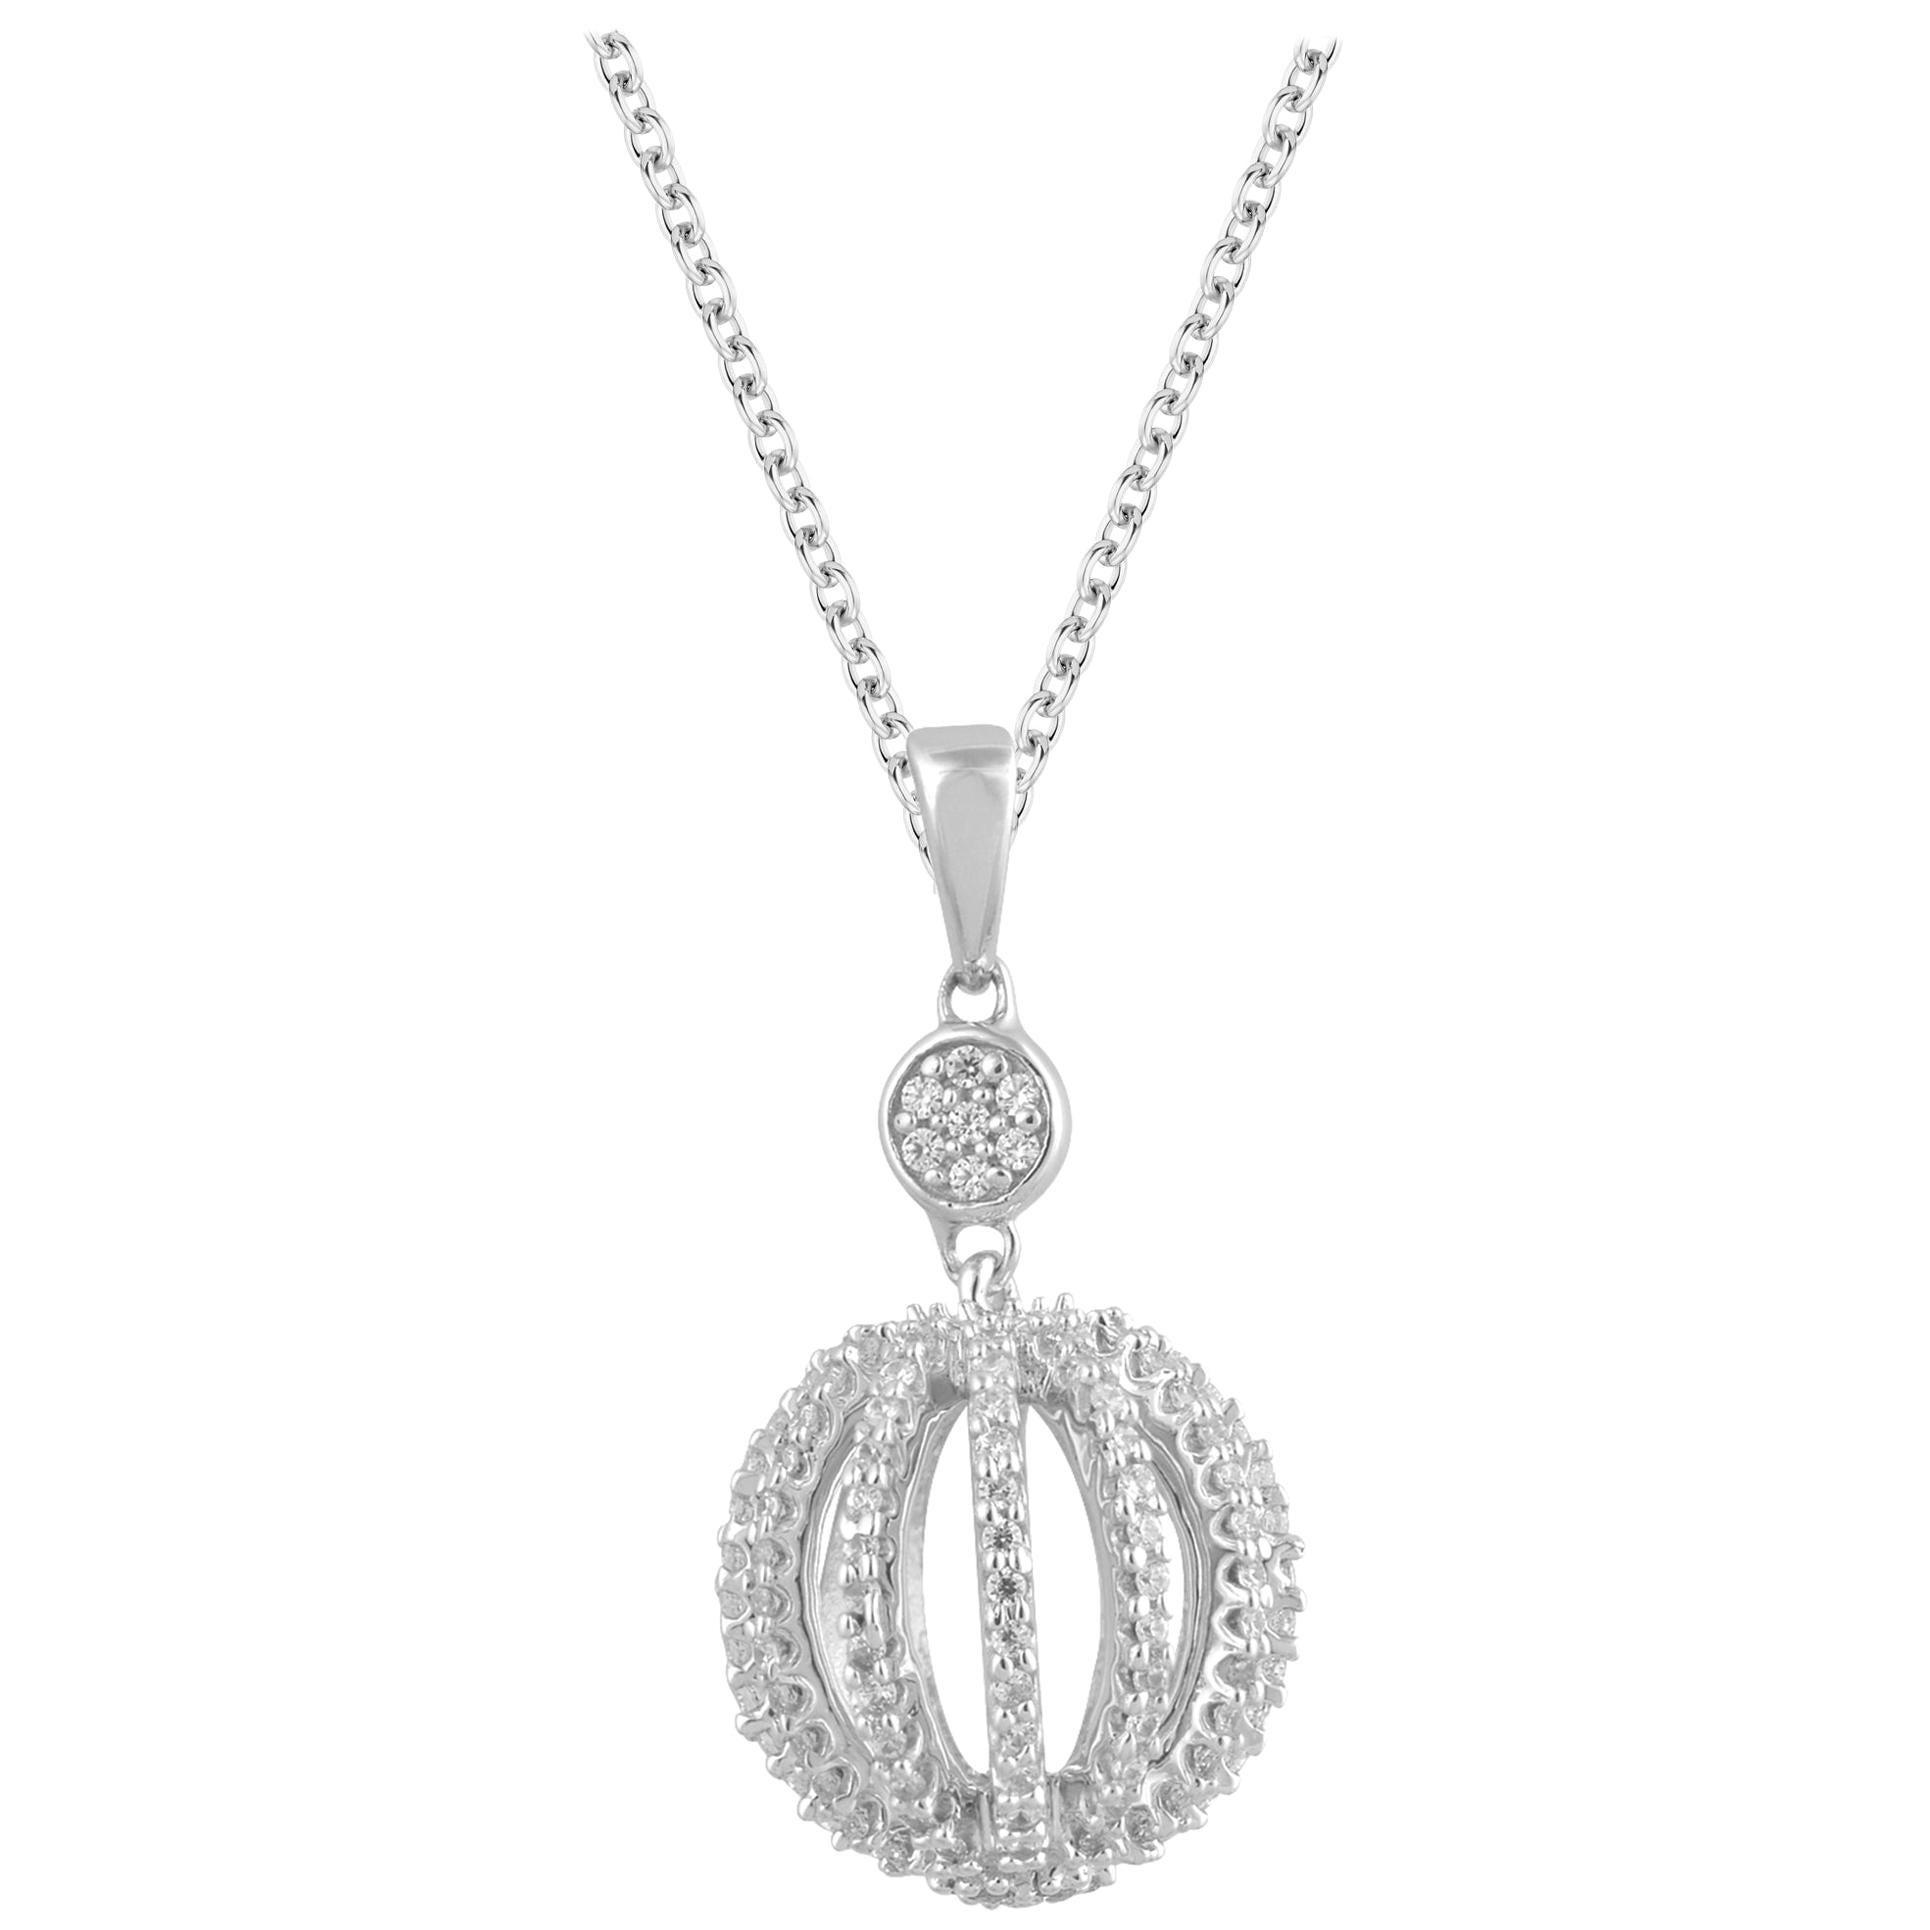 TJD 0.35 Carat Diamond 14 K White Gold Glowing Ball Pendant with 18 inch chain